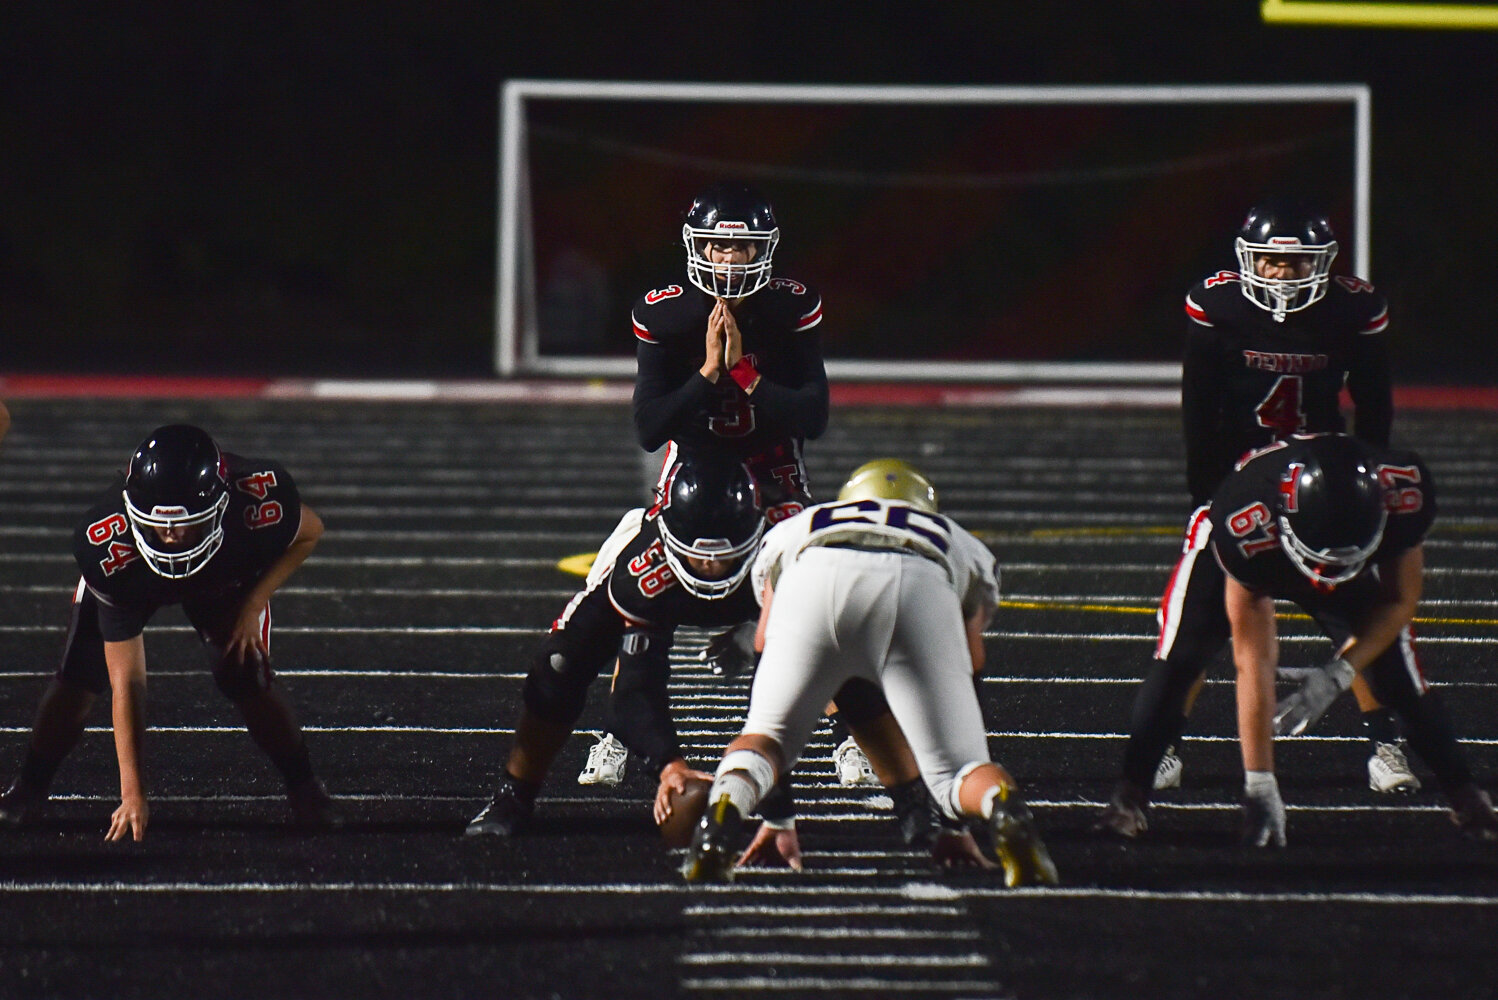 Tenino's Cody Strawn reads the Ony defense pre-snap during a 62-21 loss on Sept. 22.